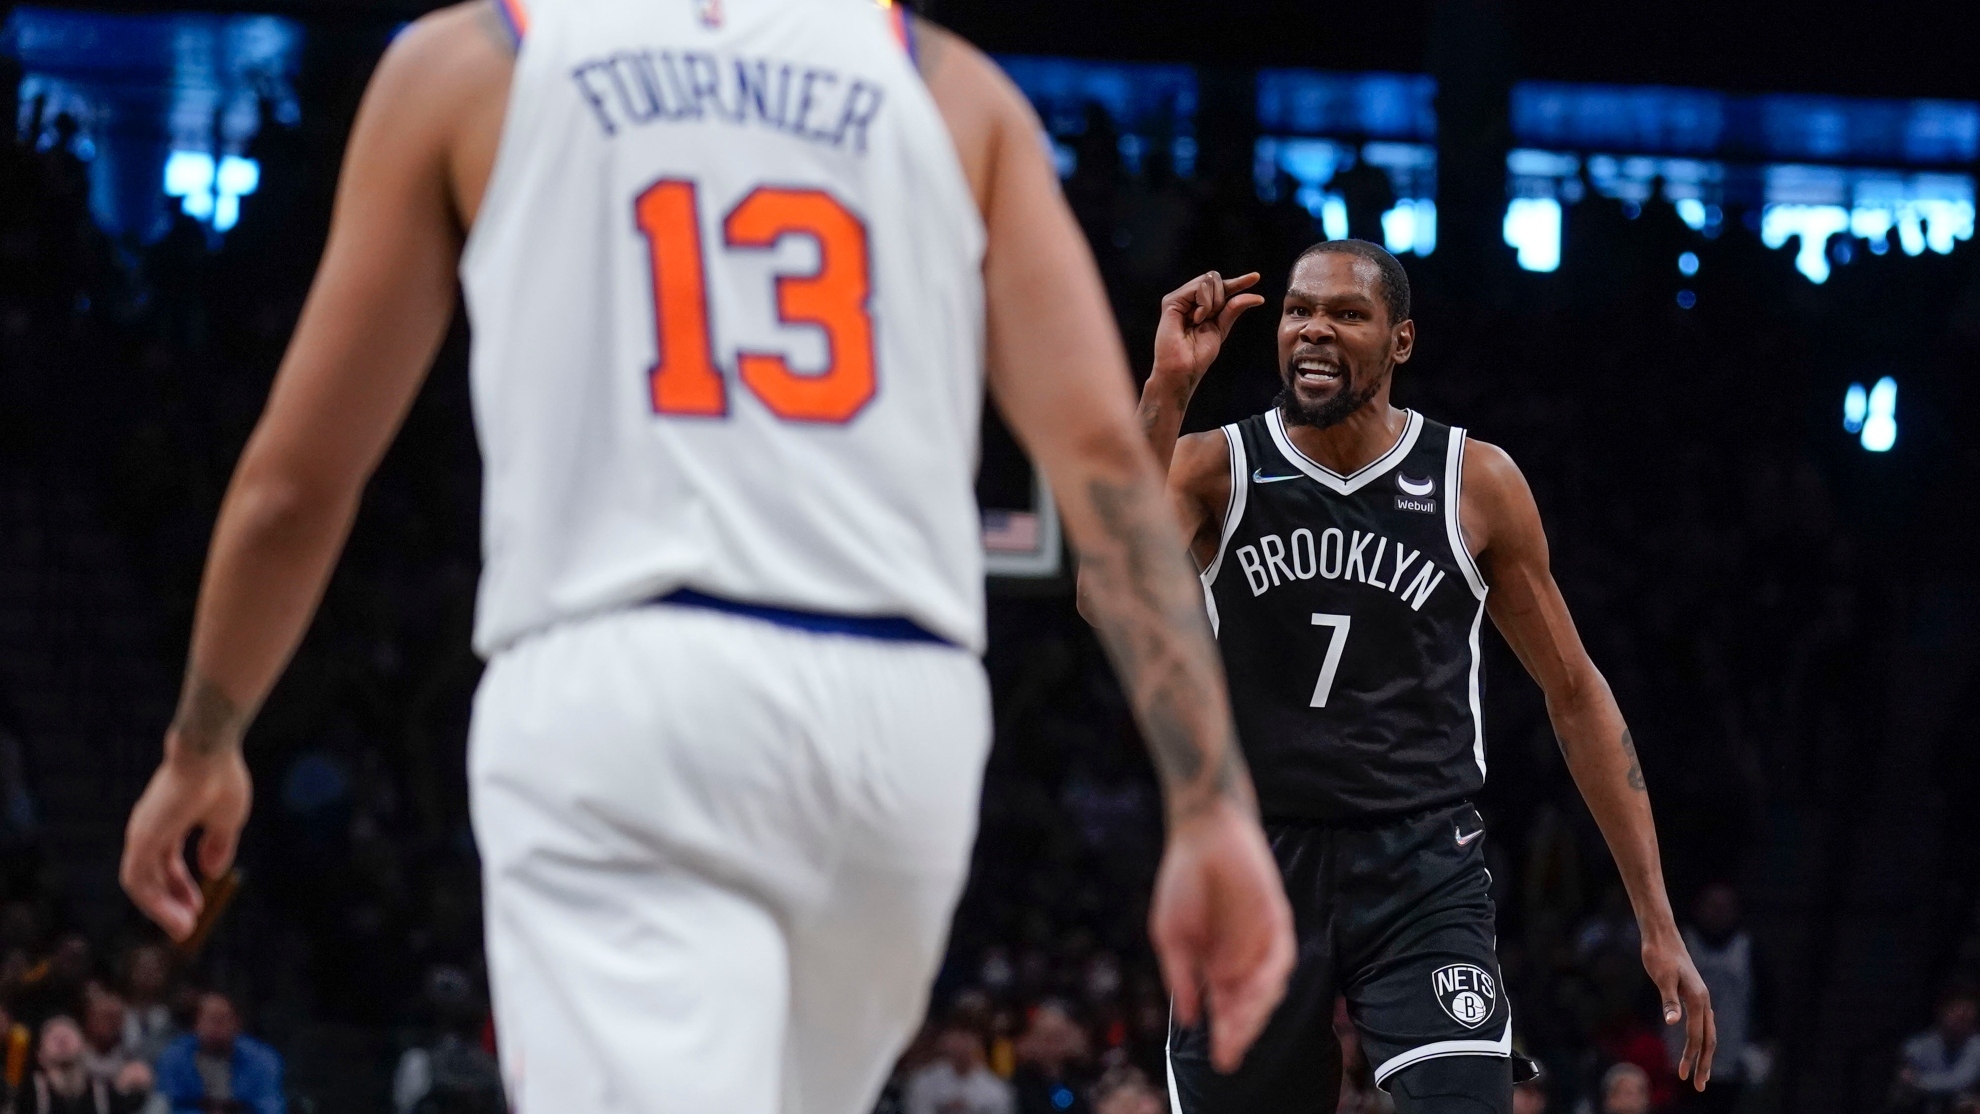 Brooklyn Nets' Kevin Durant, right, reacts after hitting a basket during the second half of the NBA basketball game against the New York Knicks